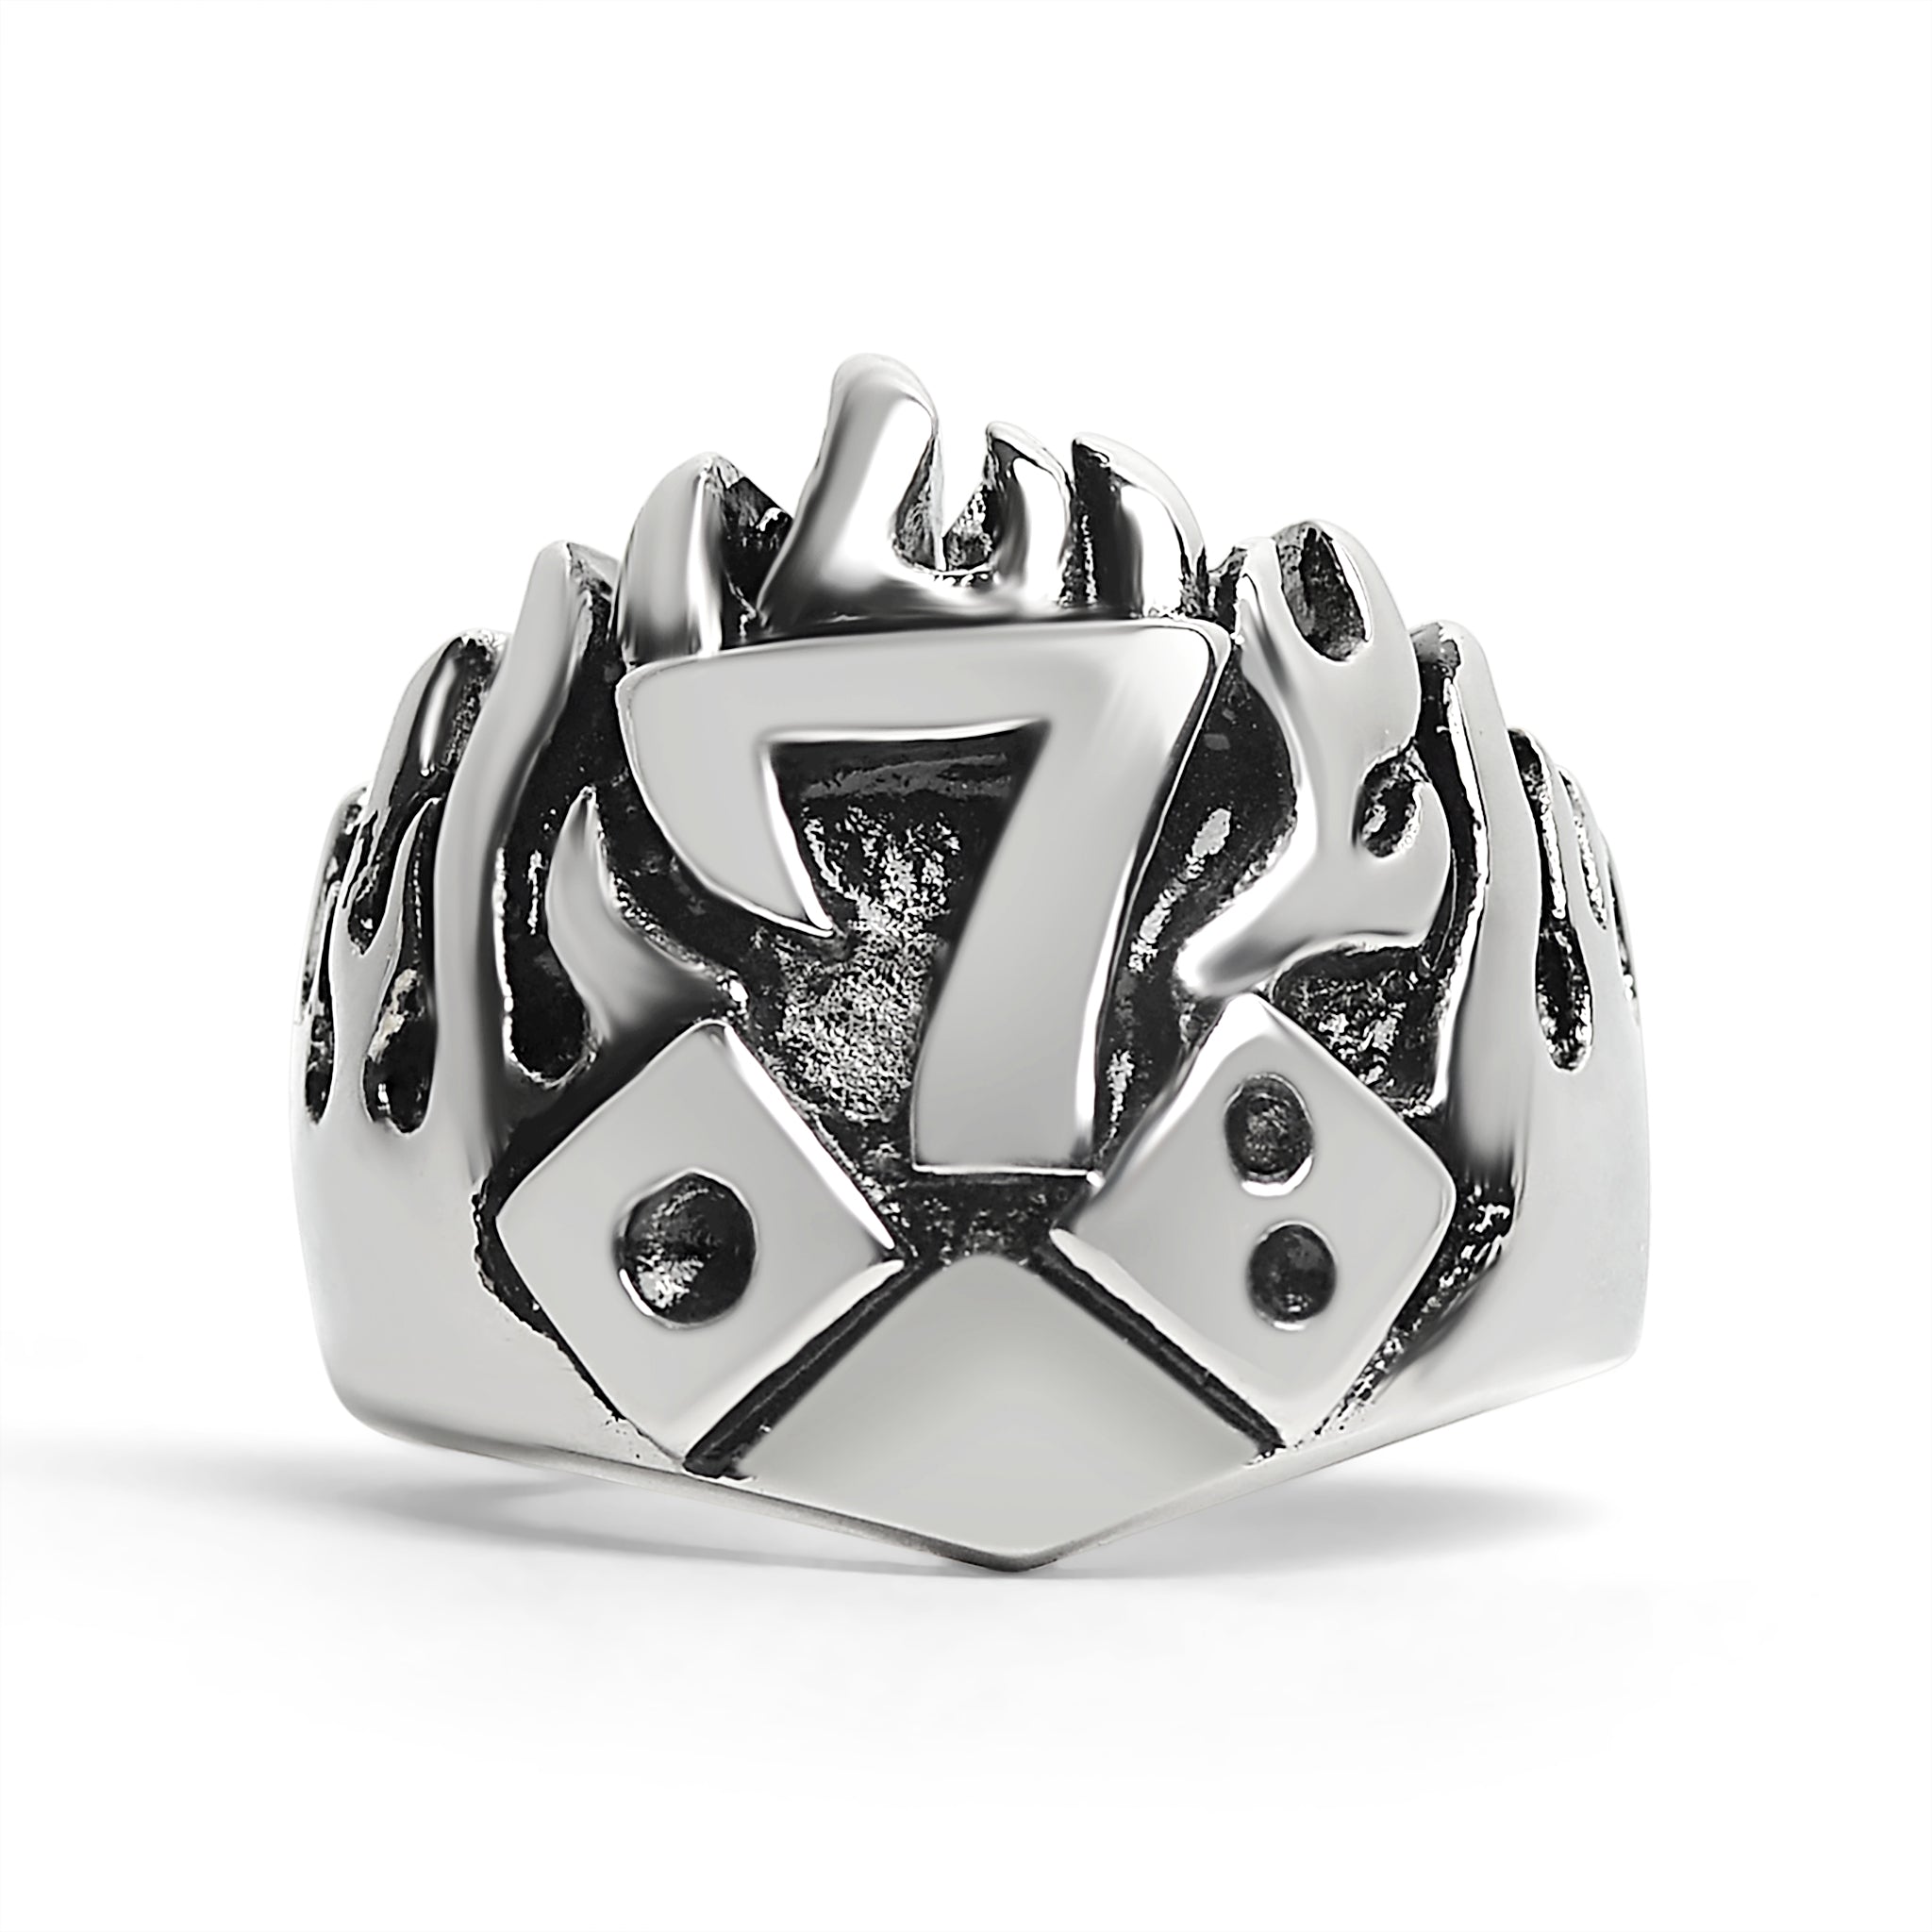 Large Detailed Lucky Seven Dice Stainless Steel Ring - Stylish Accessory for Risk Takers - Jewelry & Watches - Bijou Her -  -  - 